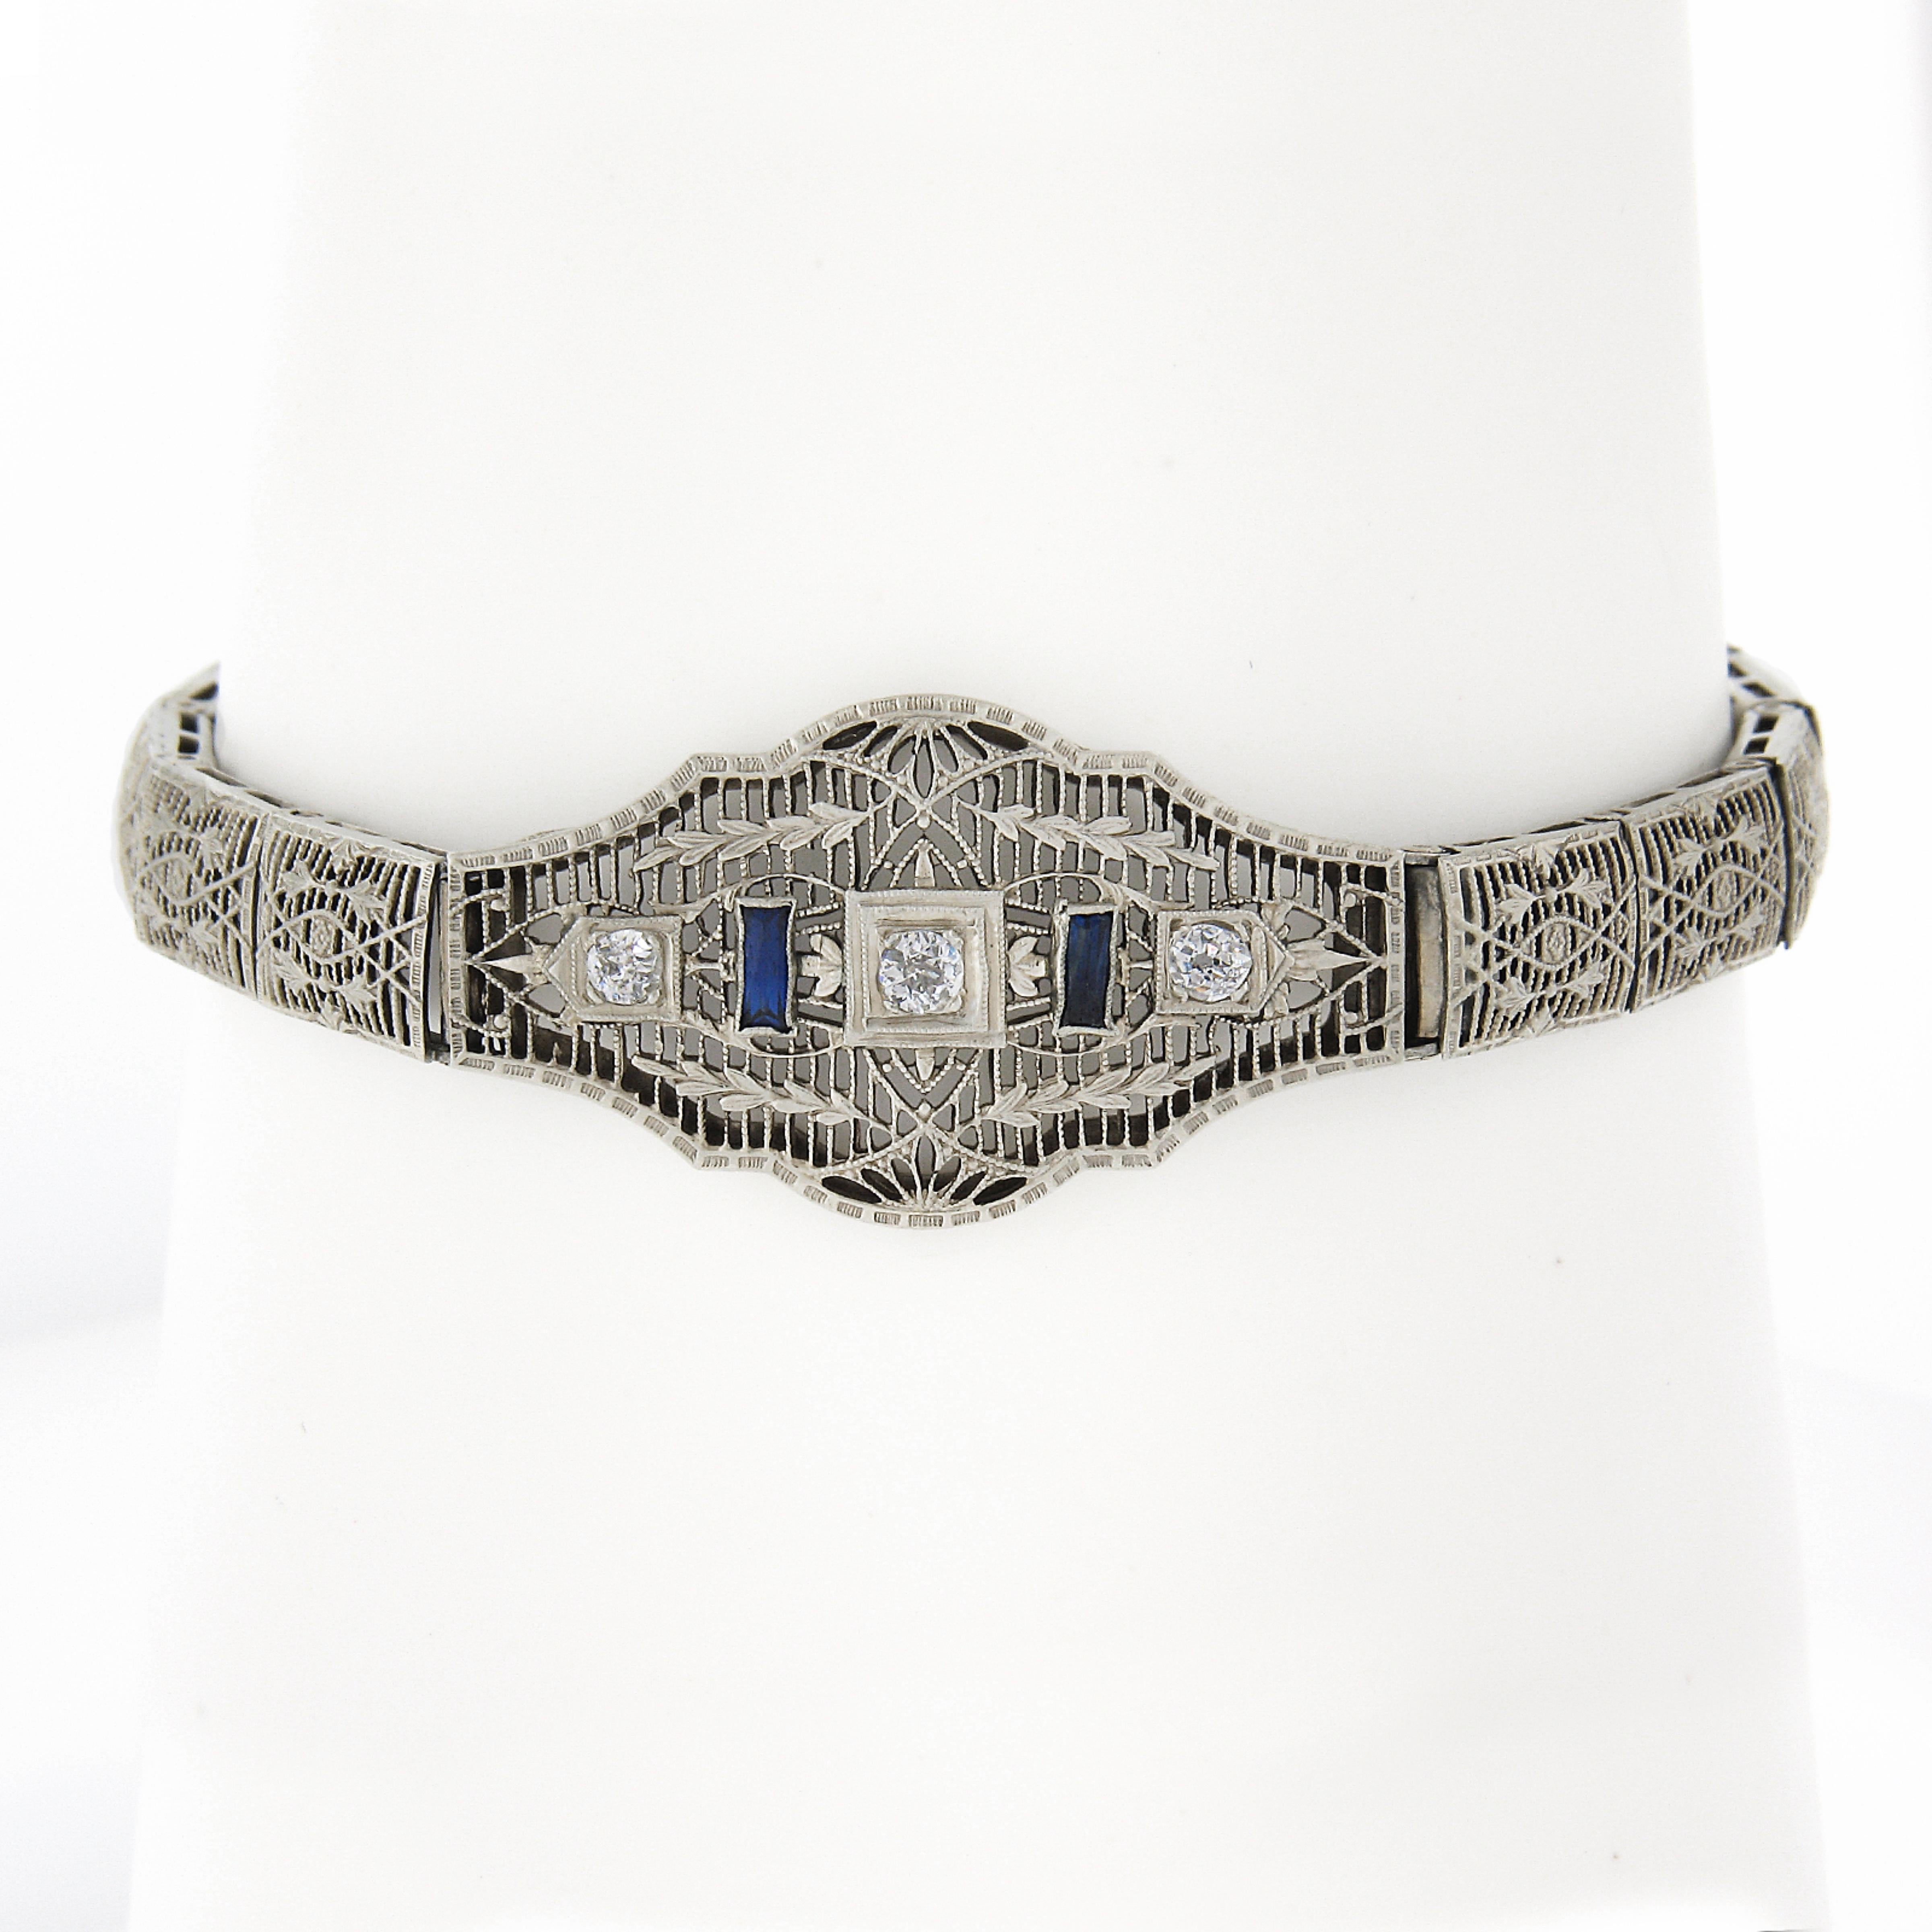 Here we have a truly breathtaking antique bracelet that was crafted from solid 14k white gold during the art deco period, featuring a centerpiece & rectangular links that are all magnificently executed open filigree work & floral patterns & adorned